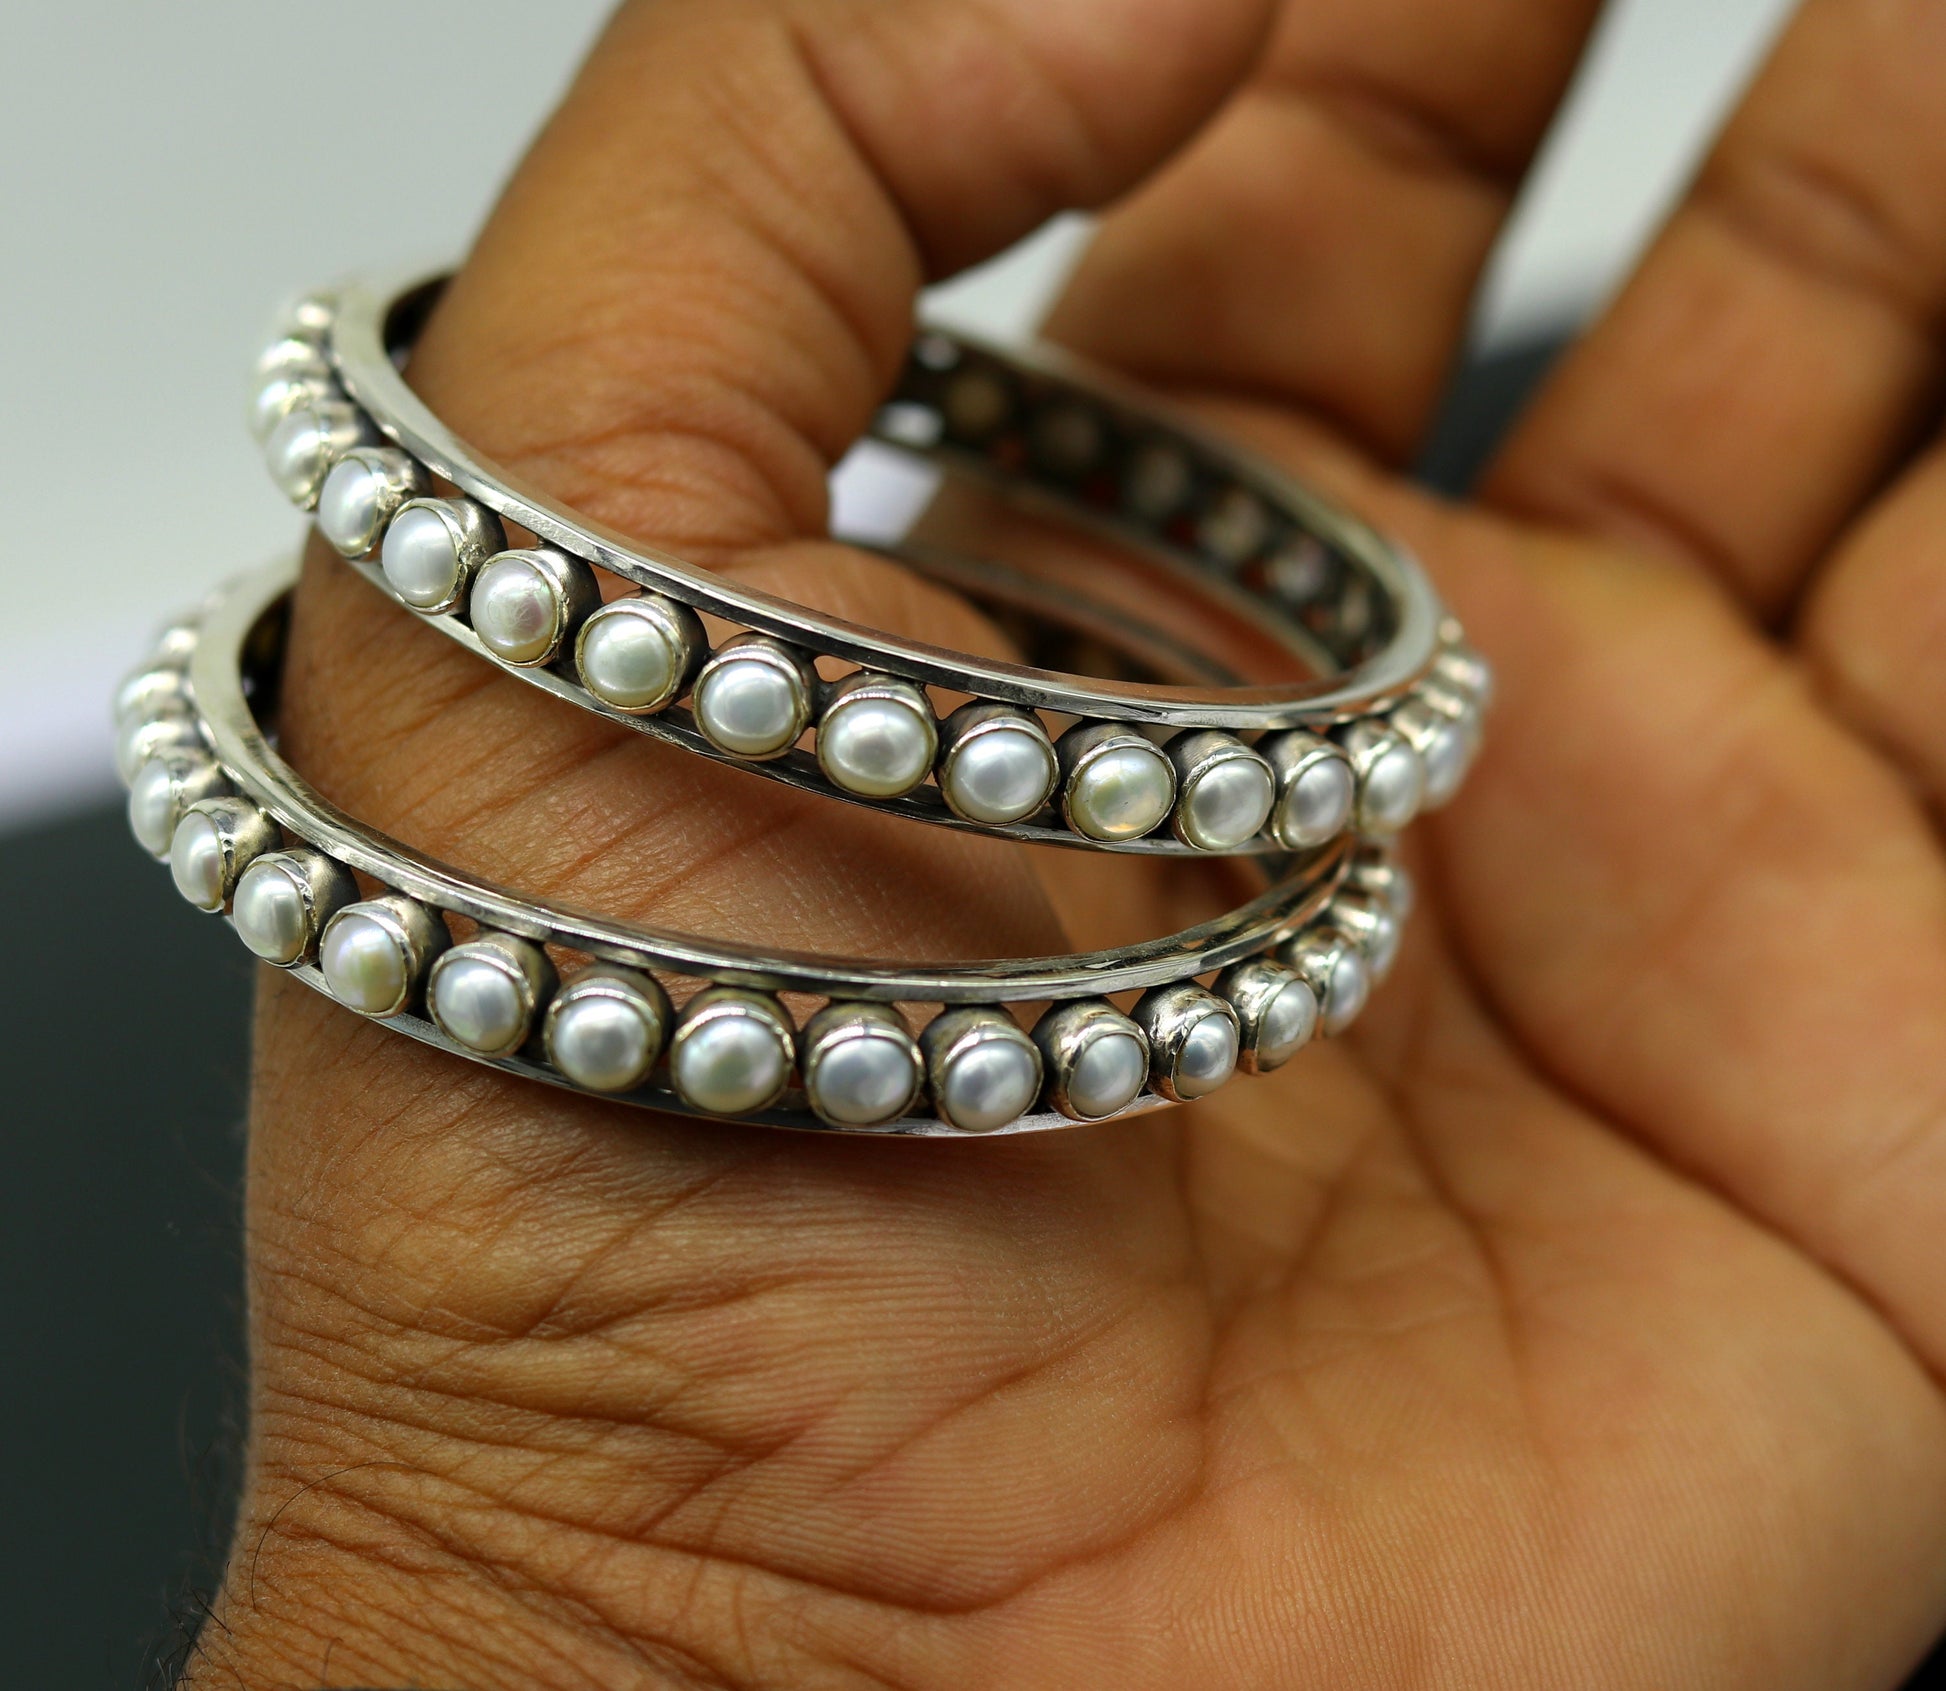 925 sterling silver handmade bangle for Girls, gorgeous natural pearl stone stylish bangle excellent customized tribal jewelry nba91 - TRIBAL ORNAMENTS